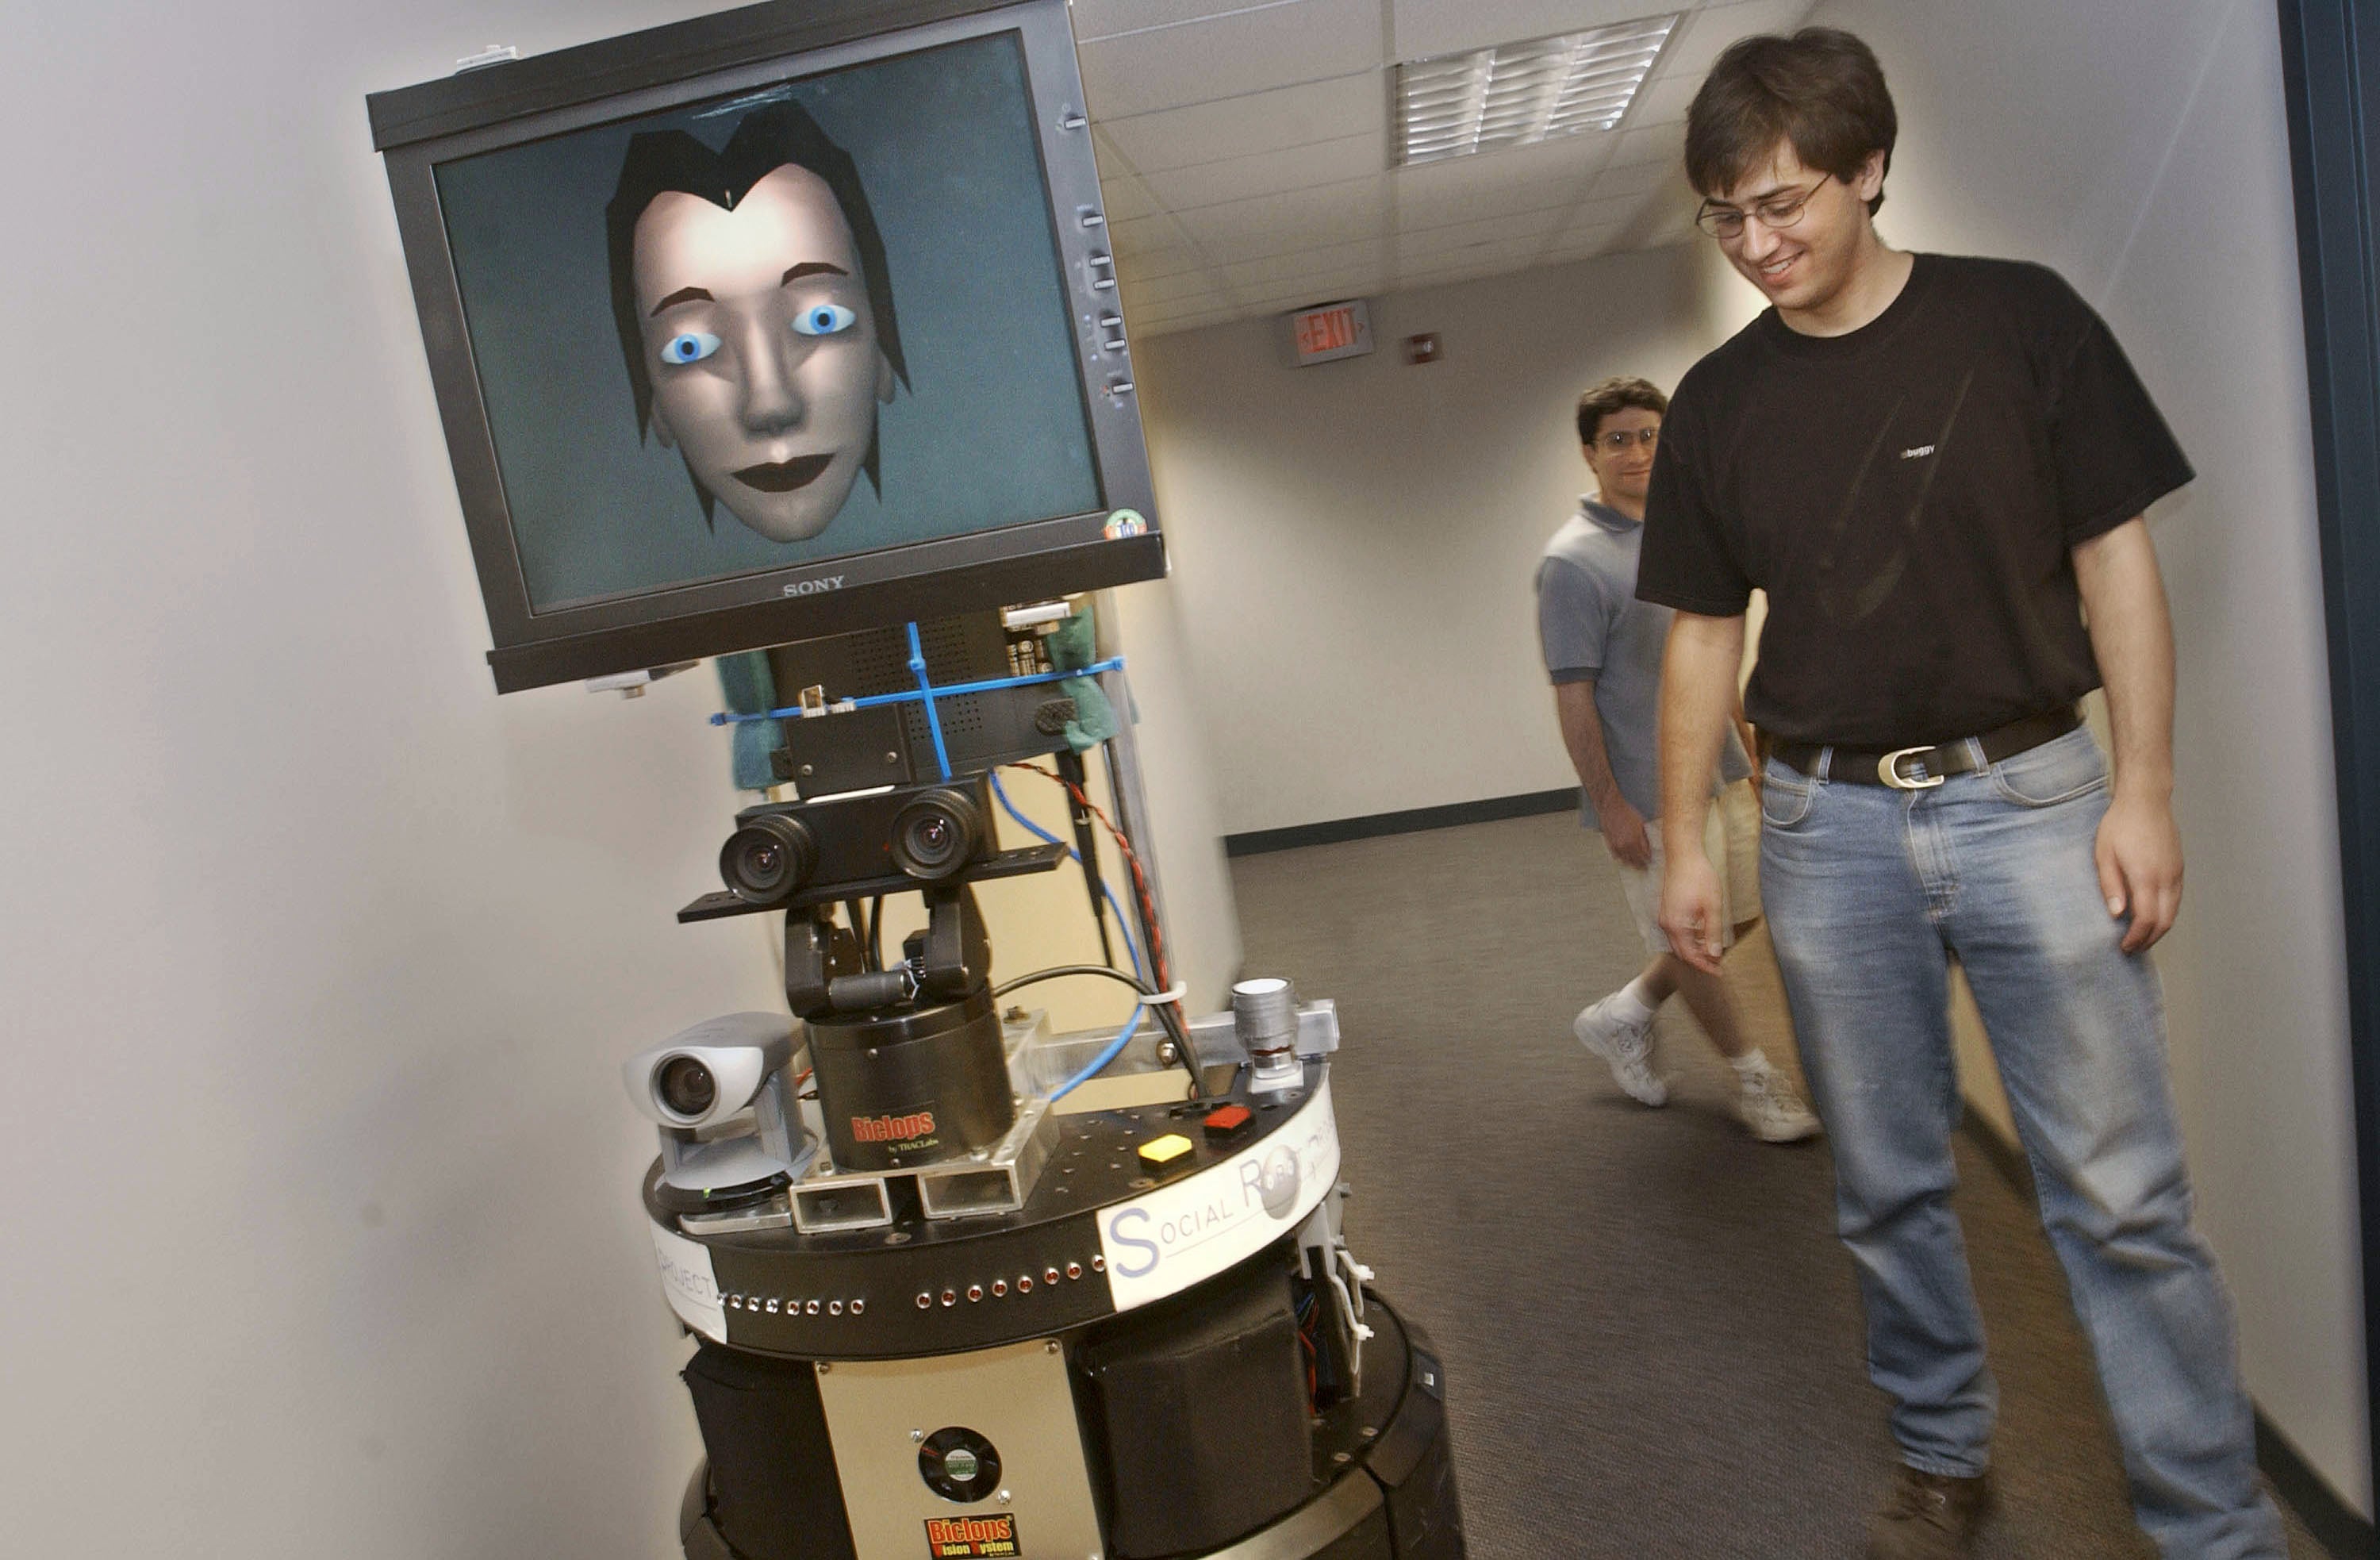 Brennan Sellner (R) and Dani Goldberg, students at Carnegie Mellon  University, watch GRACE, a prototype mobile robot, as it moves down a  hall July 15, 2002 at the Robotics Institute of Carnegie Mellon  University in Pittsburgh, Pennsylvania. (Photo: Chris Hondros, Getty Images)